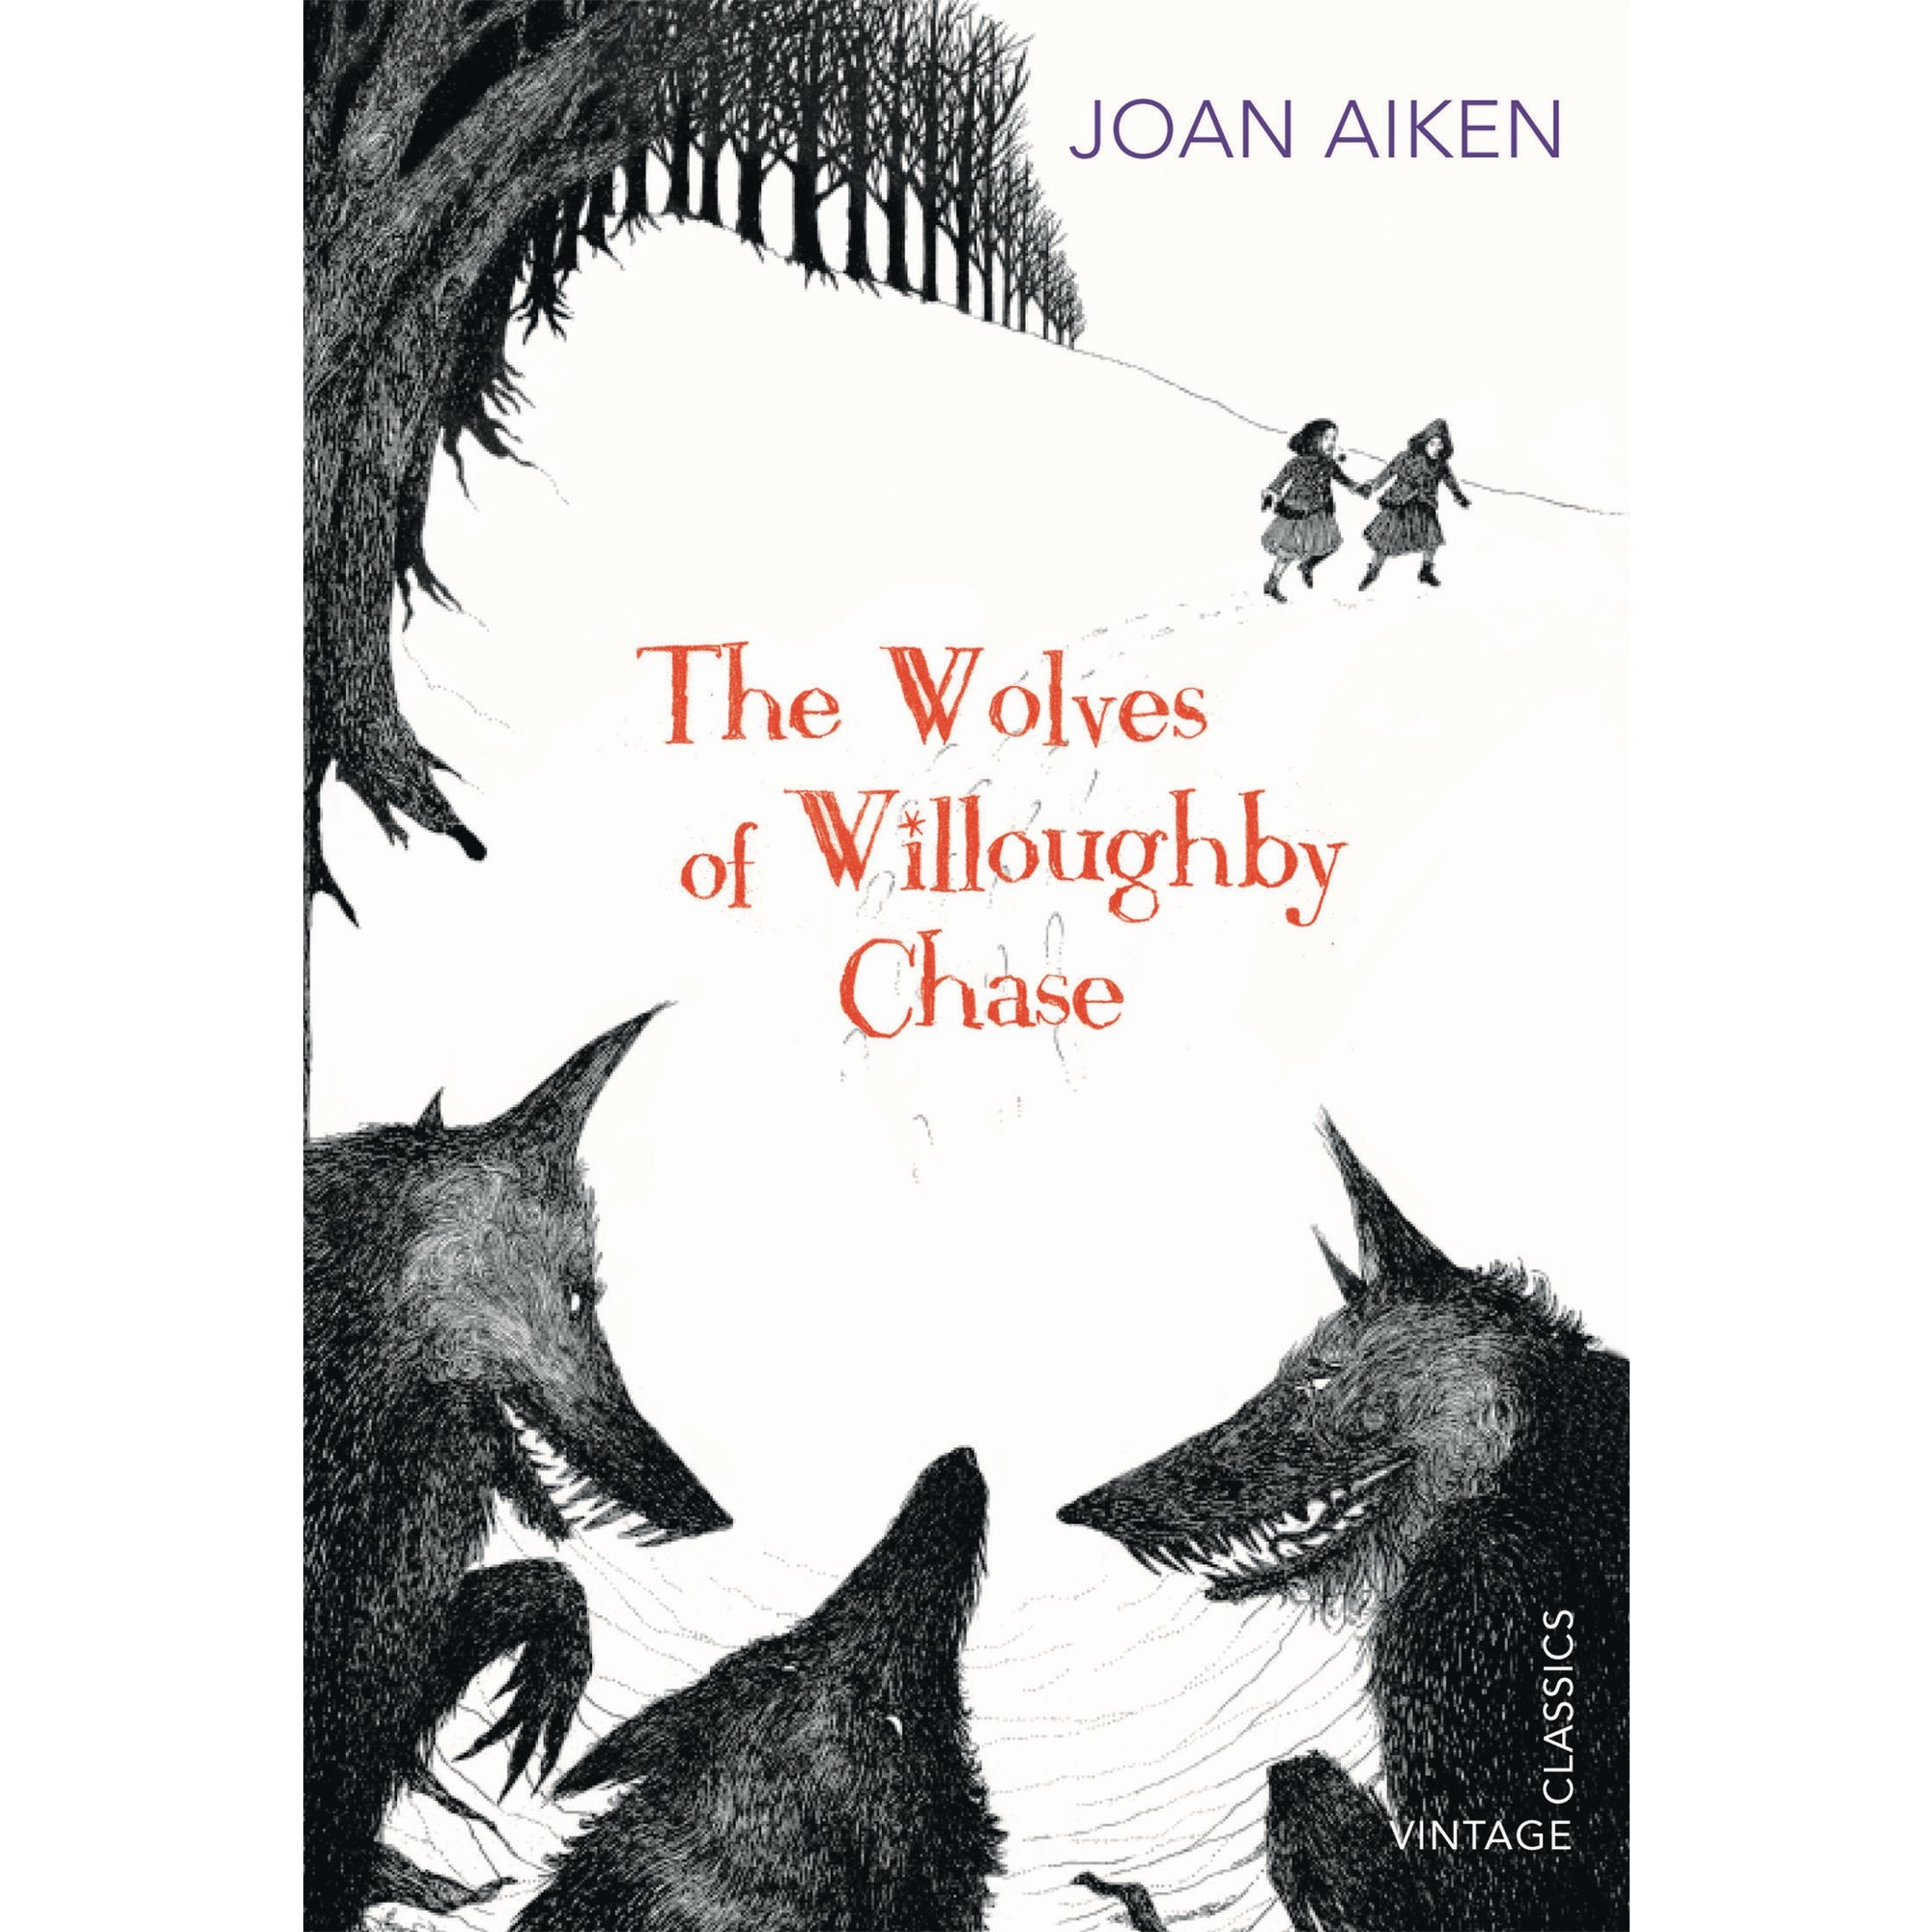 These are romping reads as well as stories that touch deeply. Pie has listed them in a suggested order that leads towards what he would say is the greatest novel ever written for children. The Wolves of Willoughby, Varjak Paw, Wolf Brother, Street Child, The Midnight Fox, Tom's Midnight Garden and Farther.